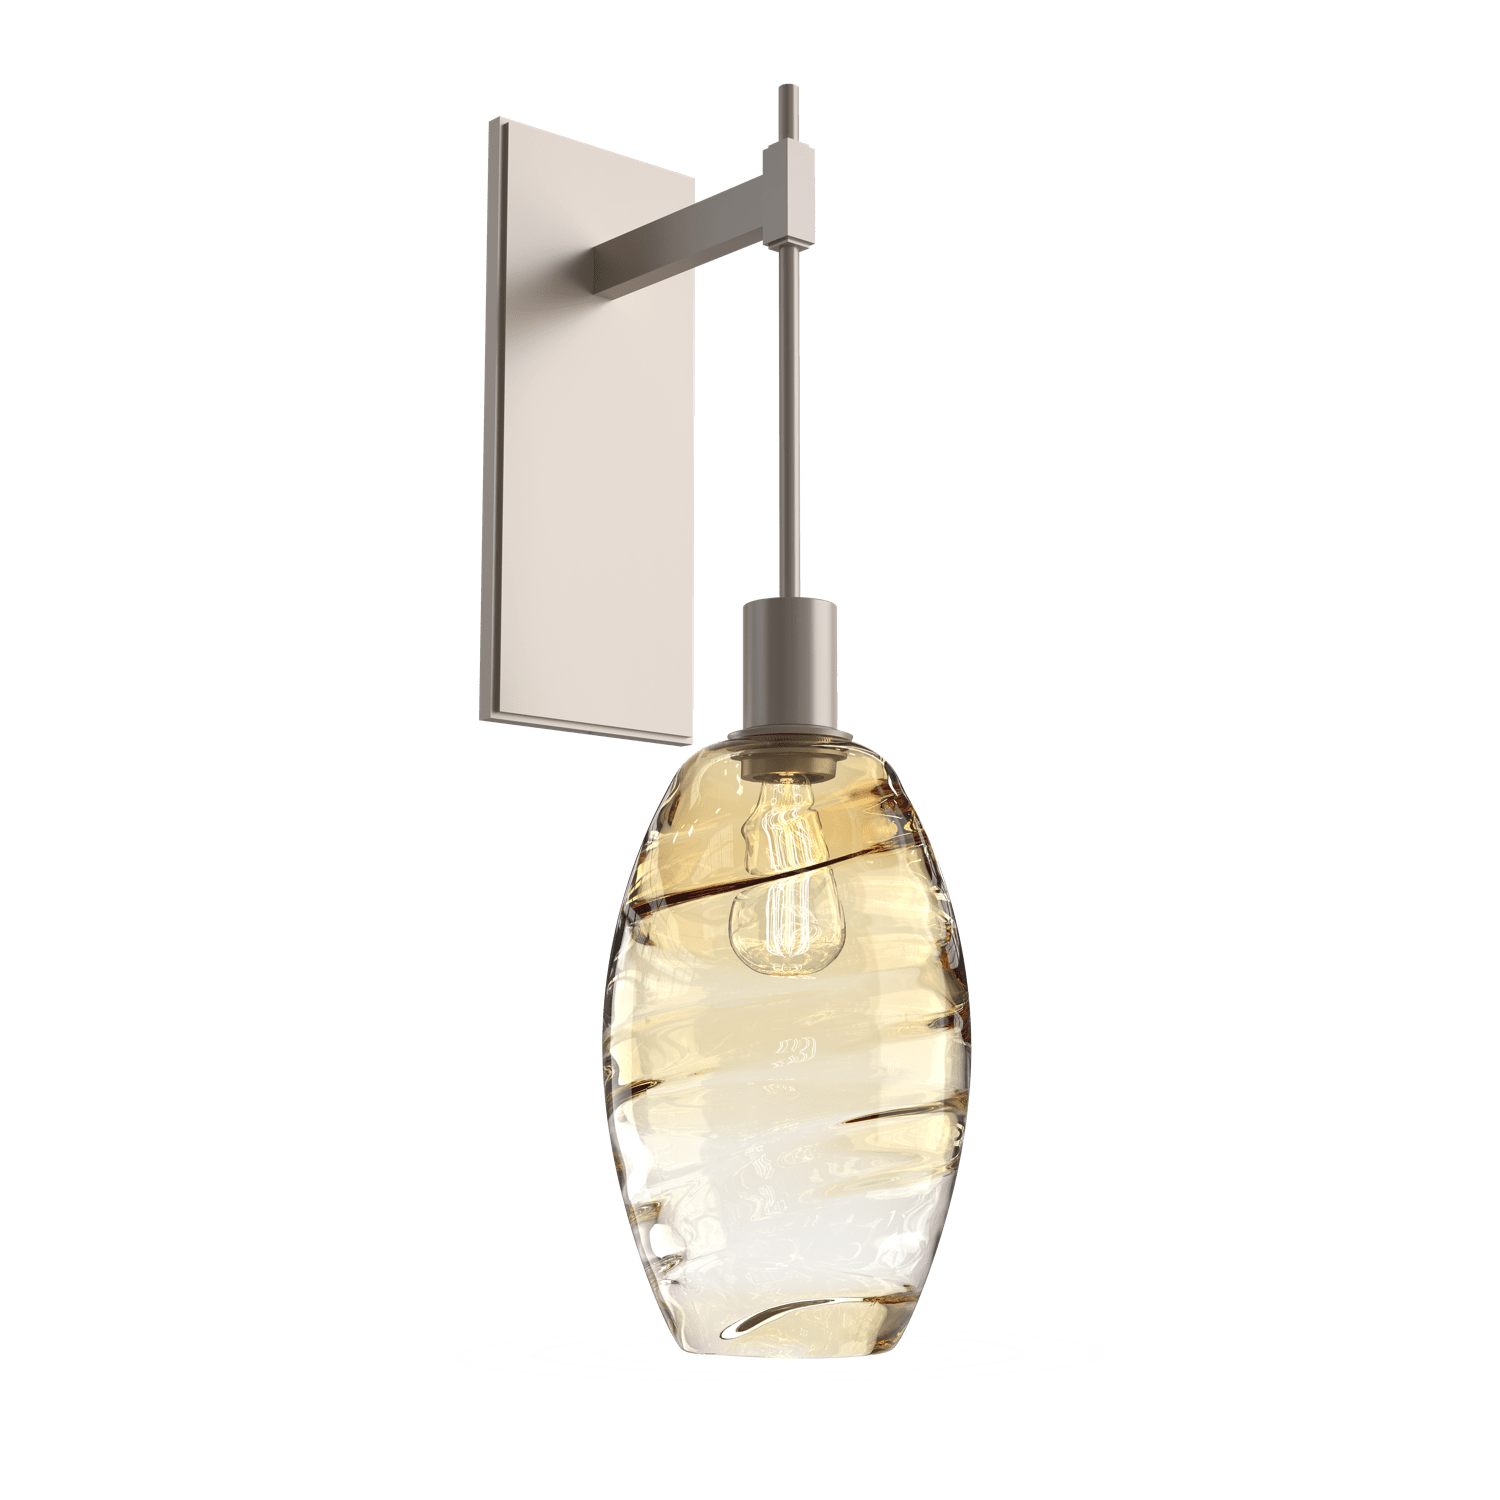 IDB0035-24-BS-OA-Hammerton-Studio-Optic-Blown-Glass-Elisse-tempo-wall-sconce-with-metallic-beige-silver-finish-and-optic-amber-blown-glass-shades-and-incandescent-lamping